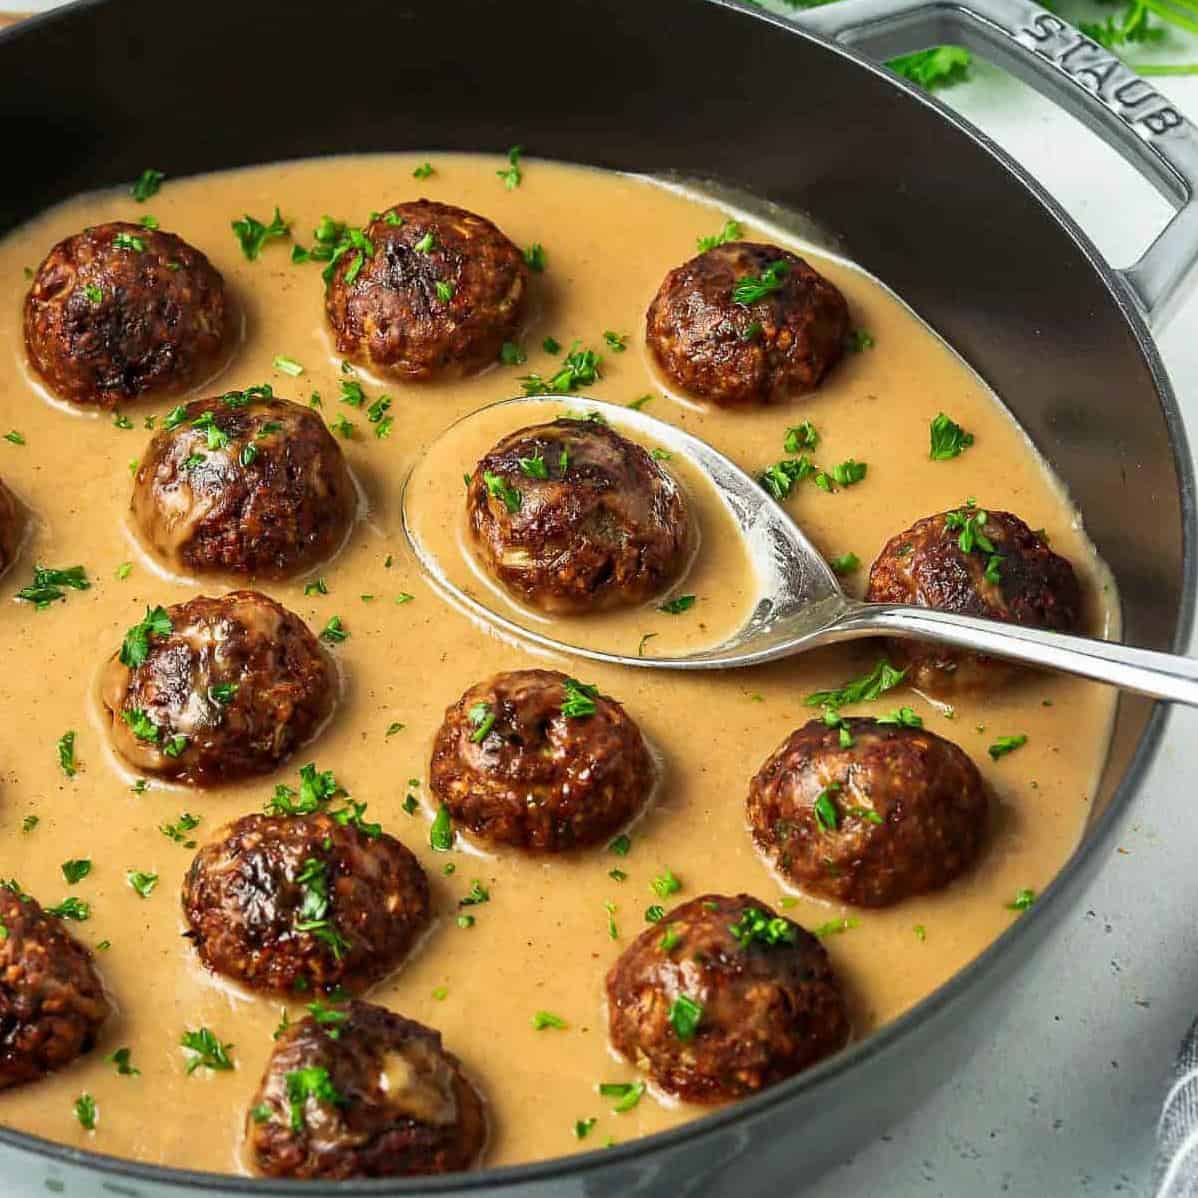  Take a bite into these meatballs and be transported to Sweden.